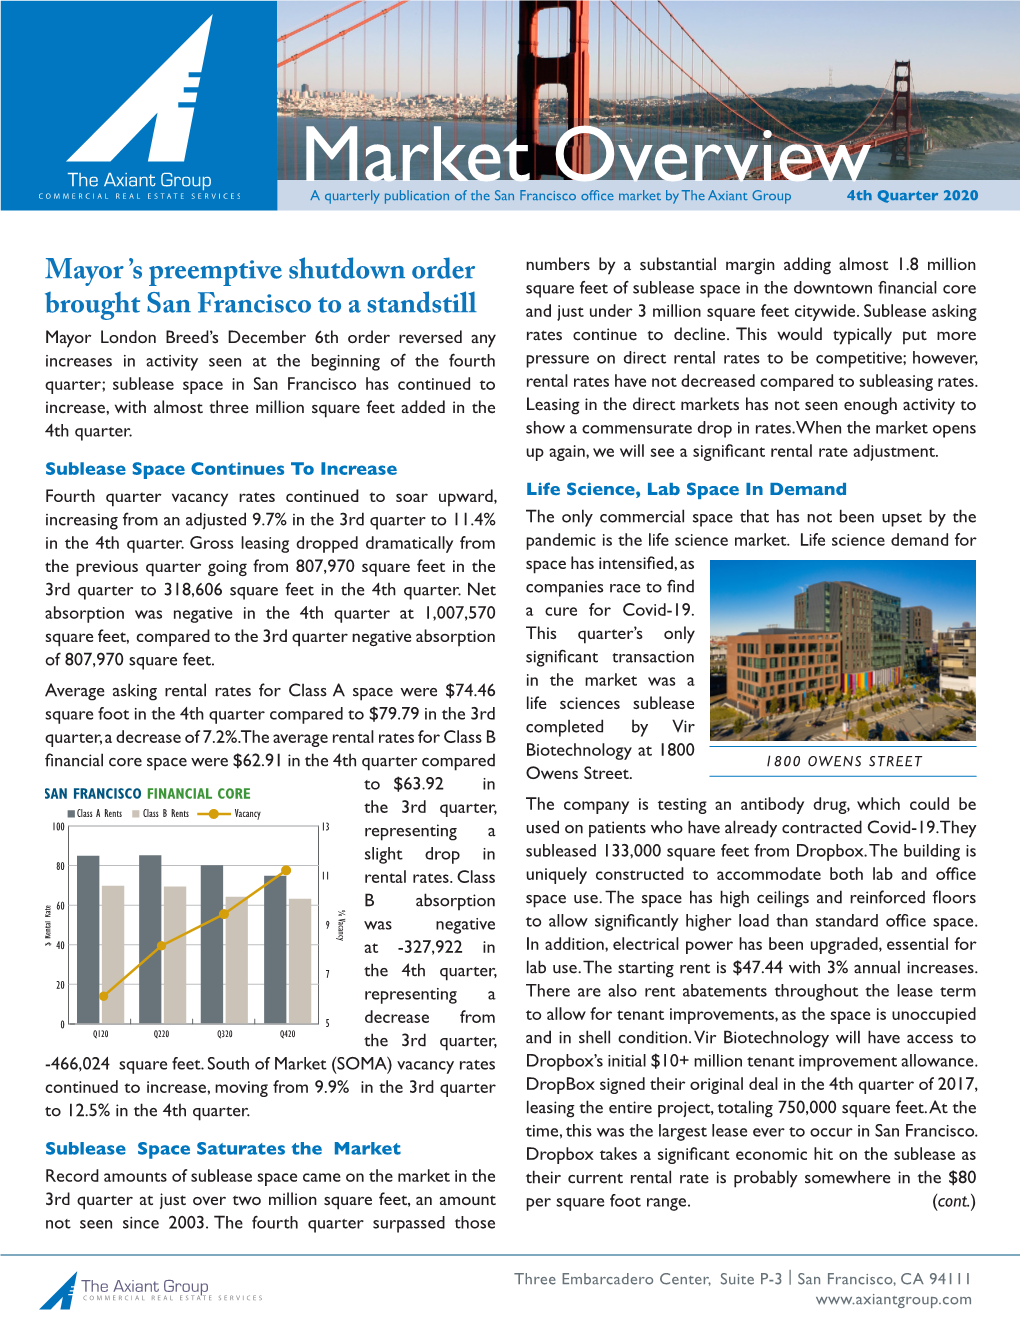 Market Overview a Quarterly Publication of the San Francisco Office Market by the Axiant Group 4Th Quarter 2020